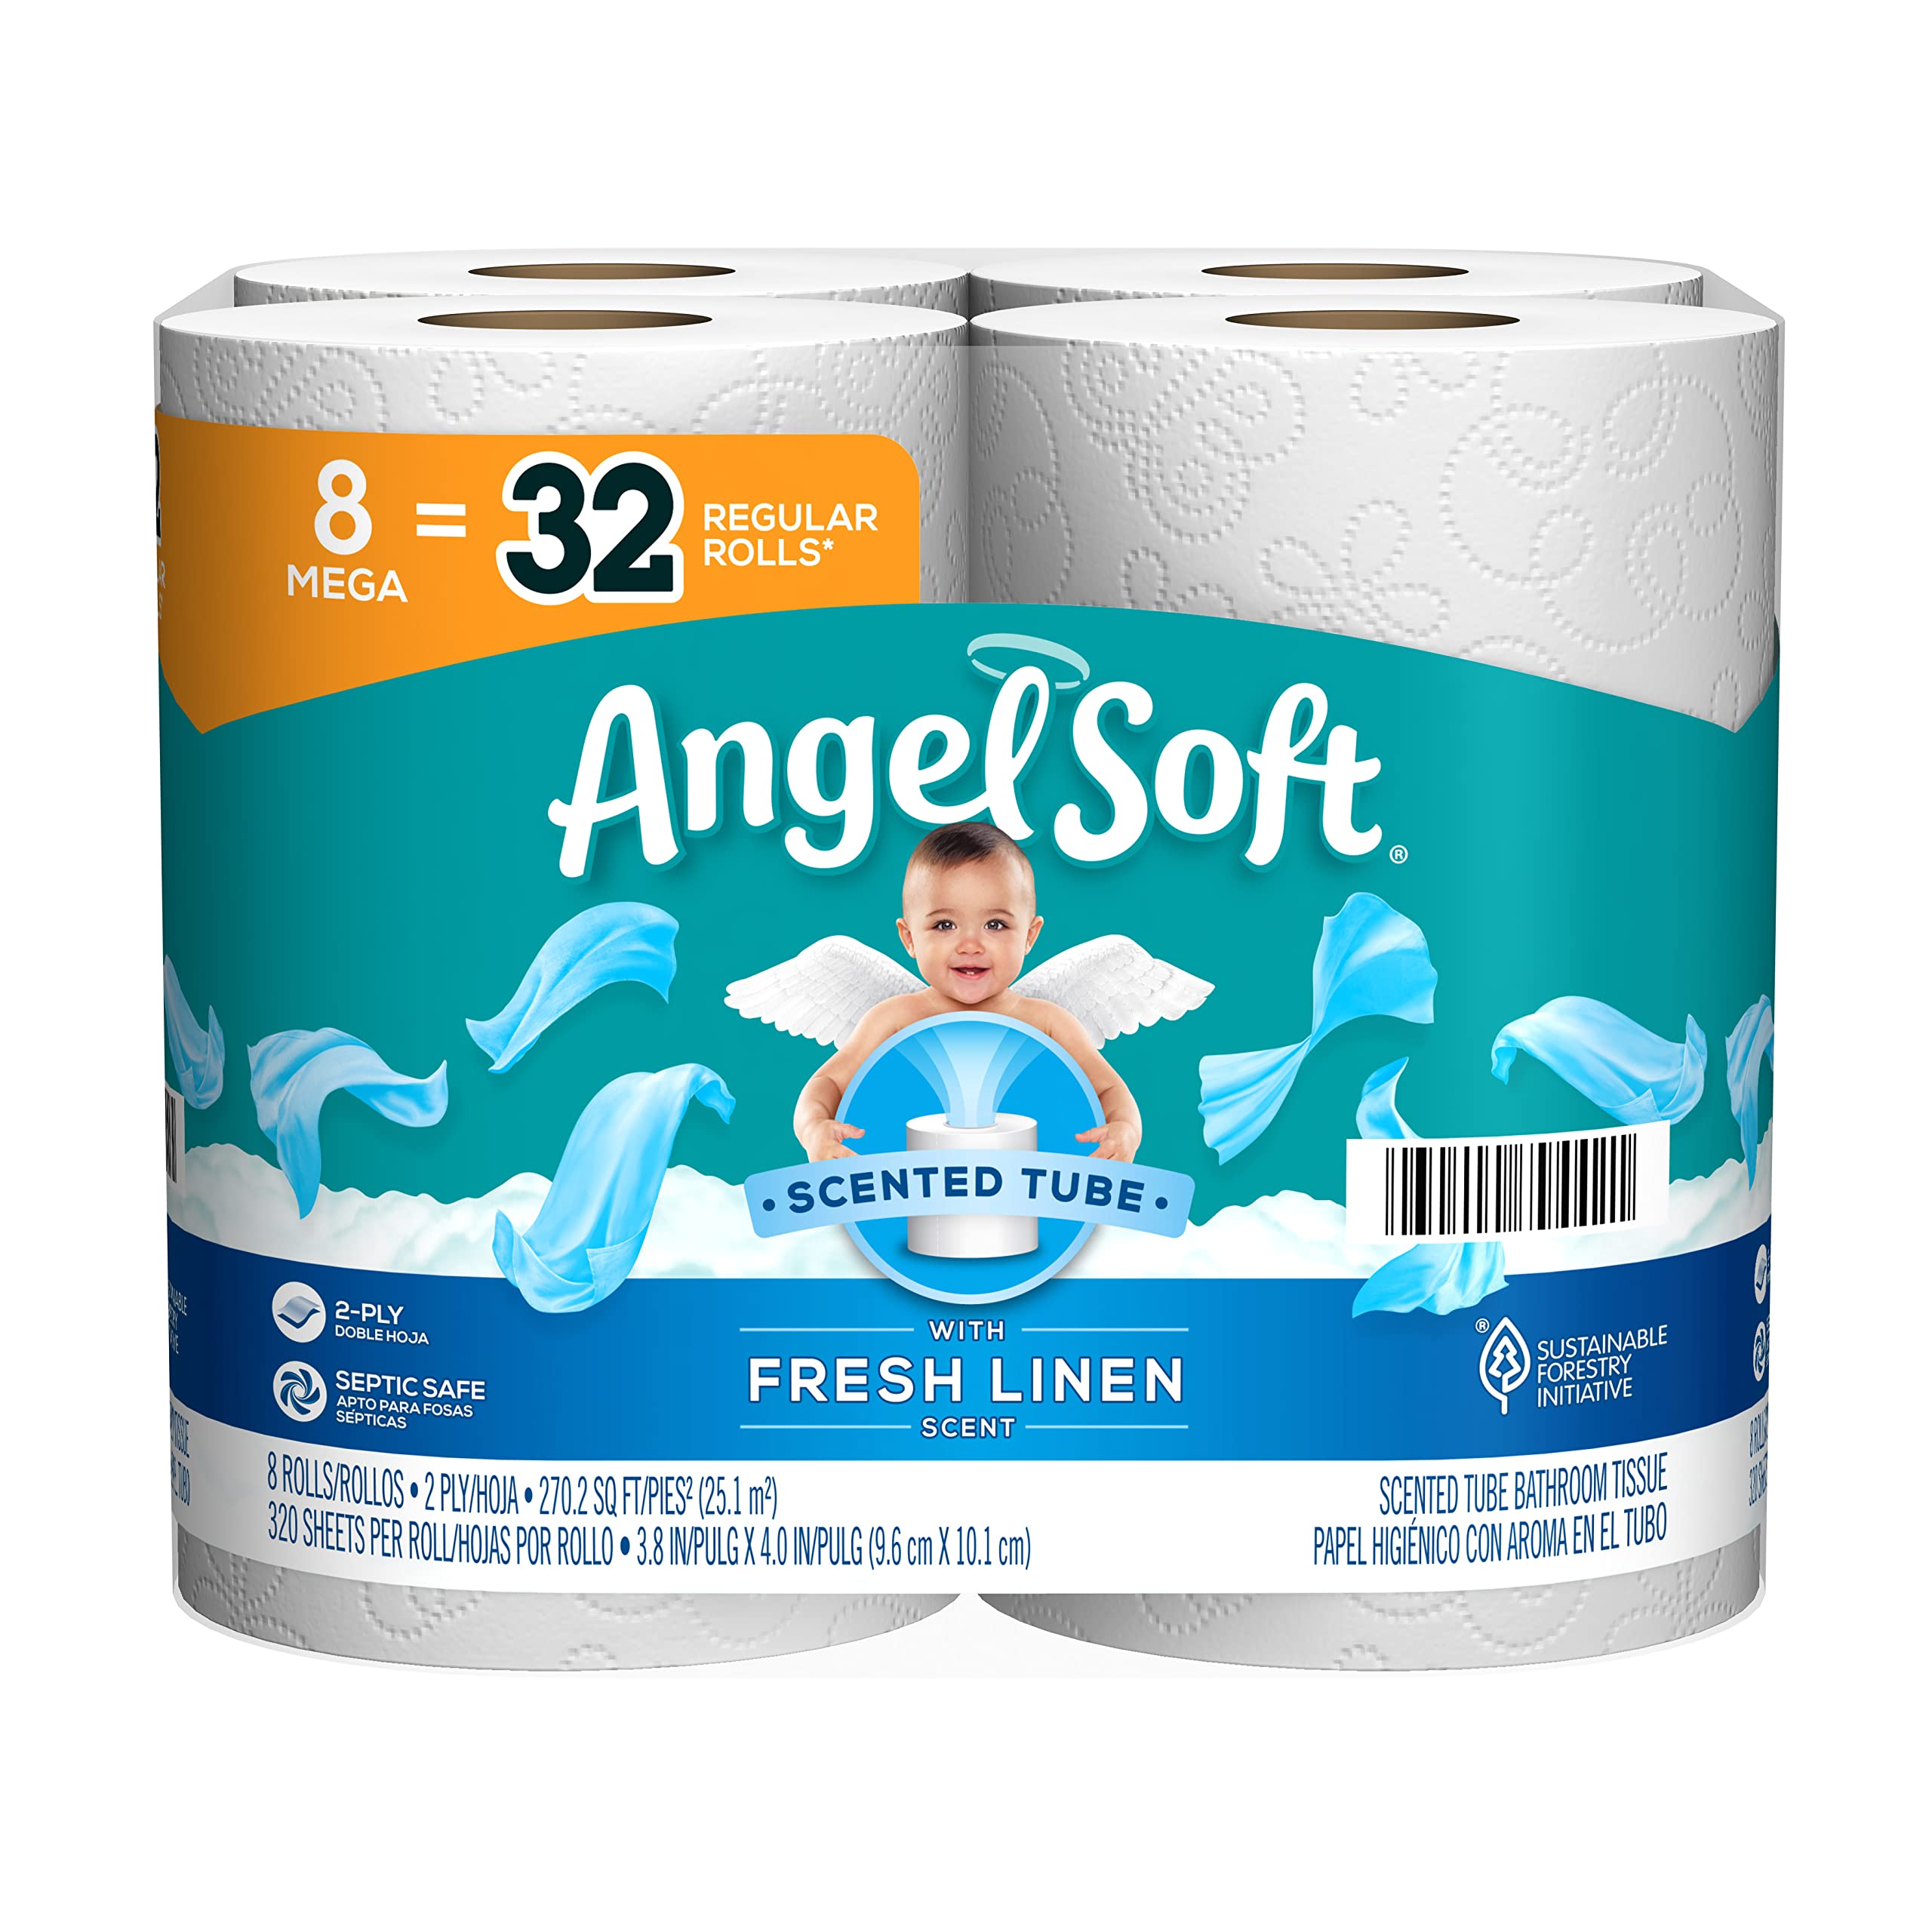 Angel Soft Toilet Paper with Fresh Linen Scented Tube, 8 Mega Rolls = 32 Regular Rolls, Soft and Strong Toilet Tissue